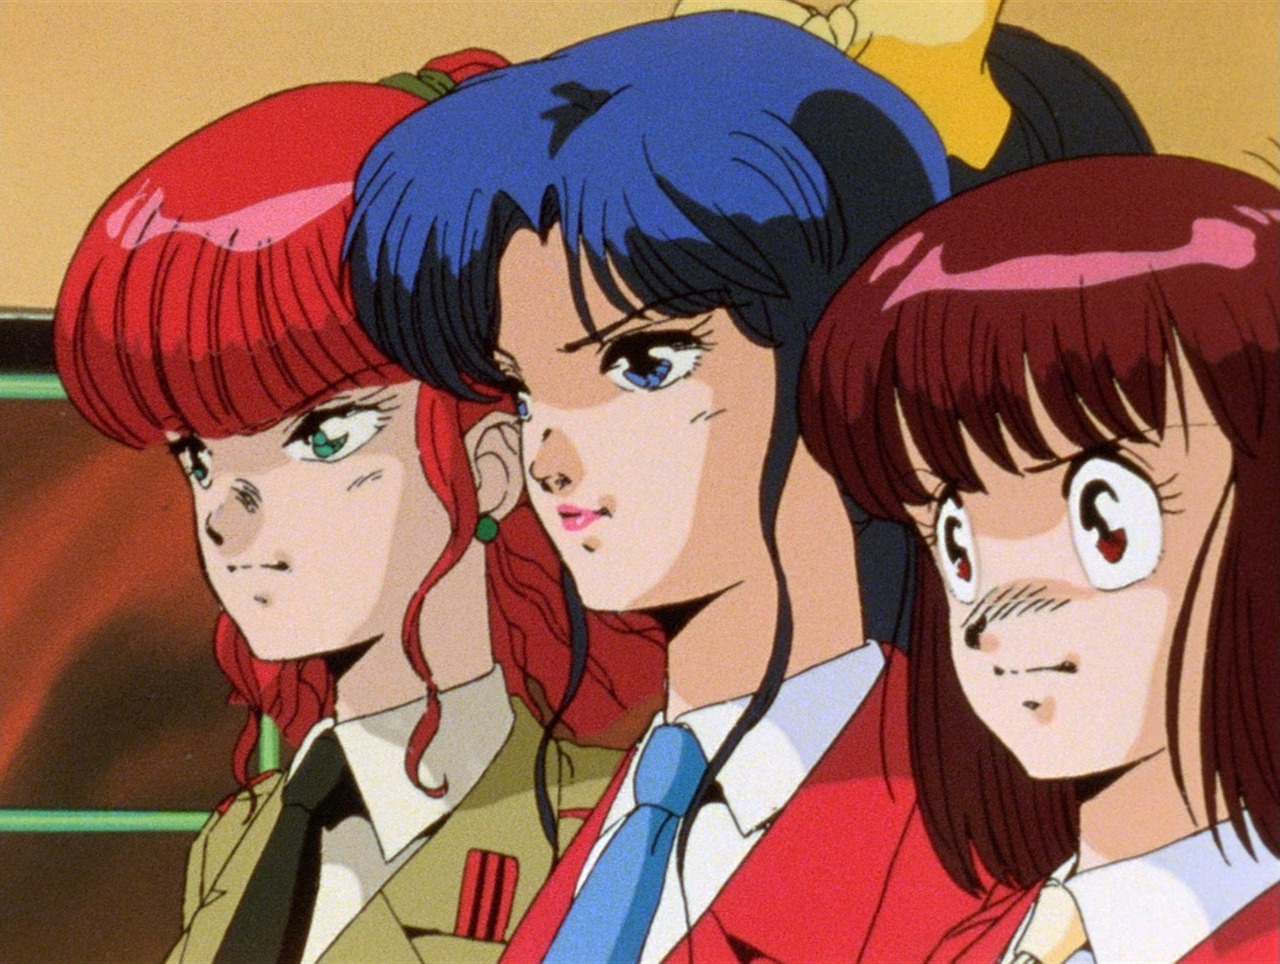 Hideaki Anno’s First Directorial Anime Work Gunbuster Heads Back to Japanese Theaters for 35th Anniversary